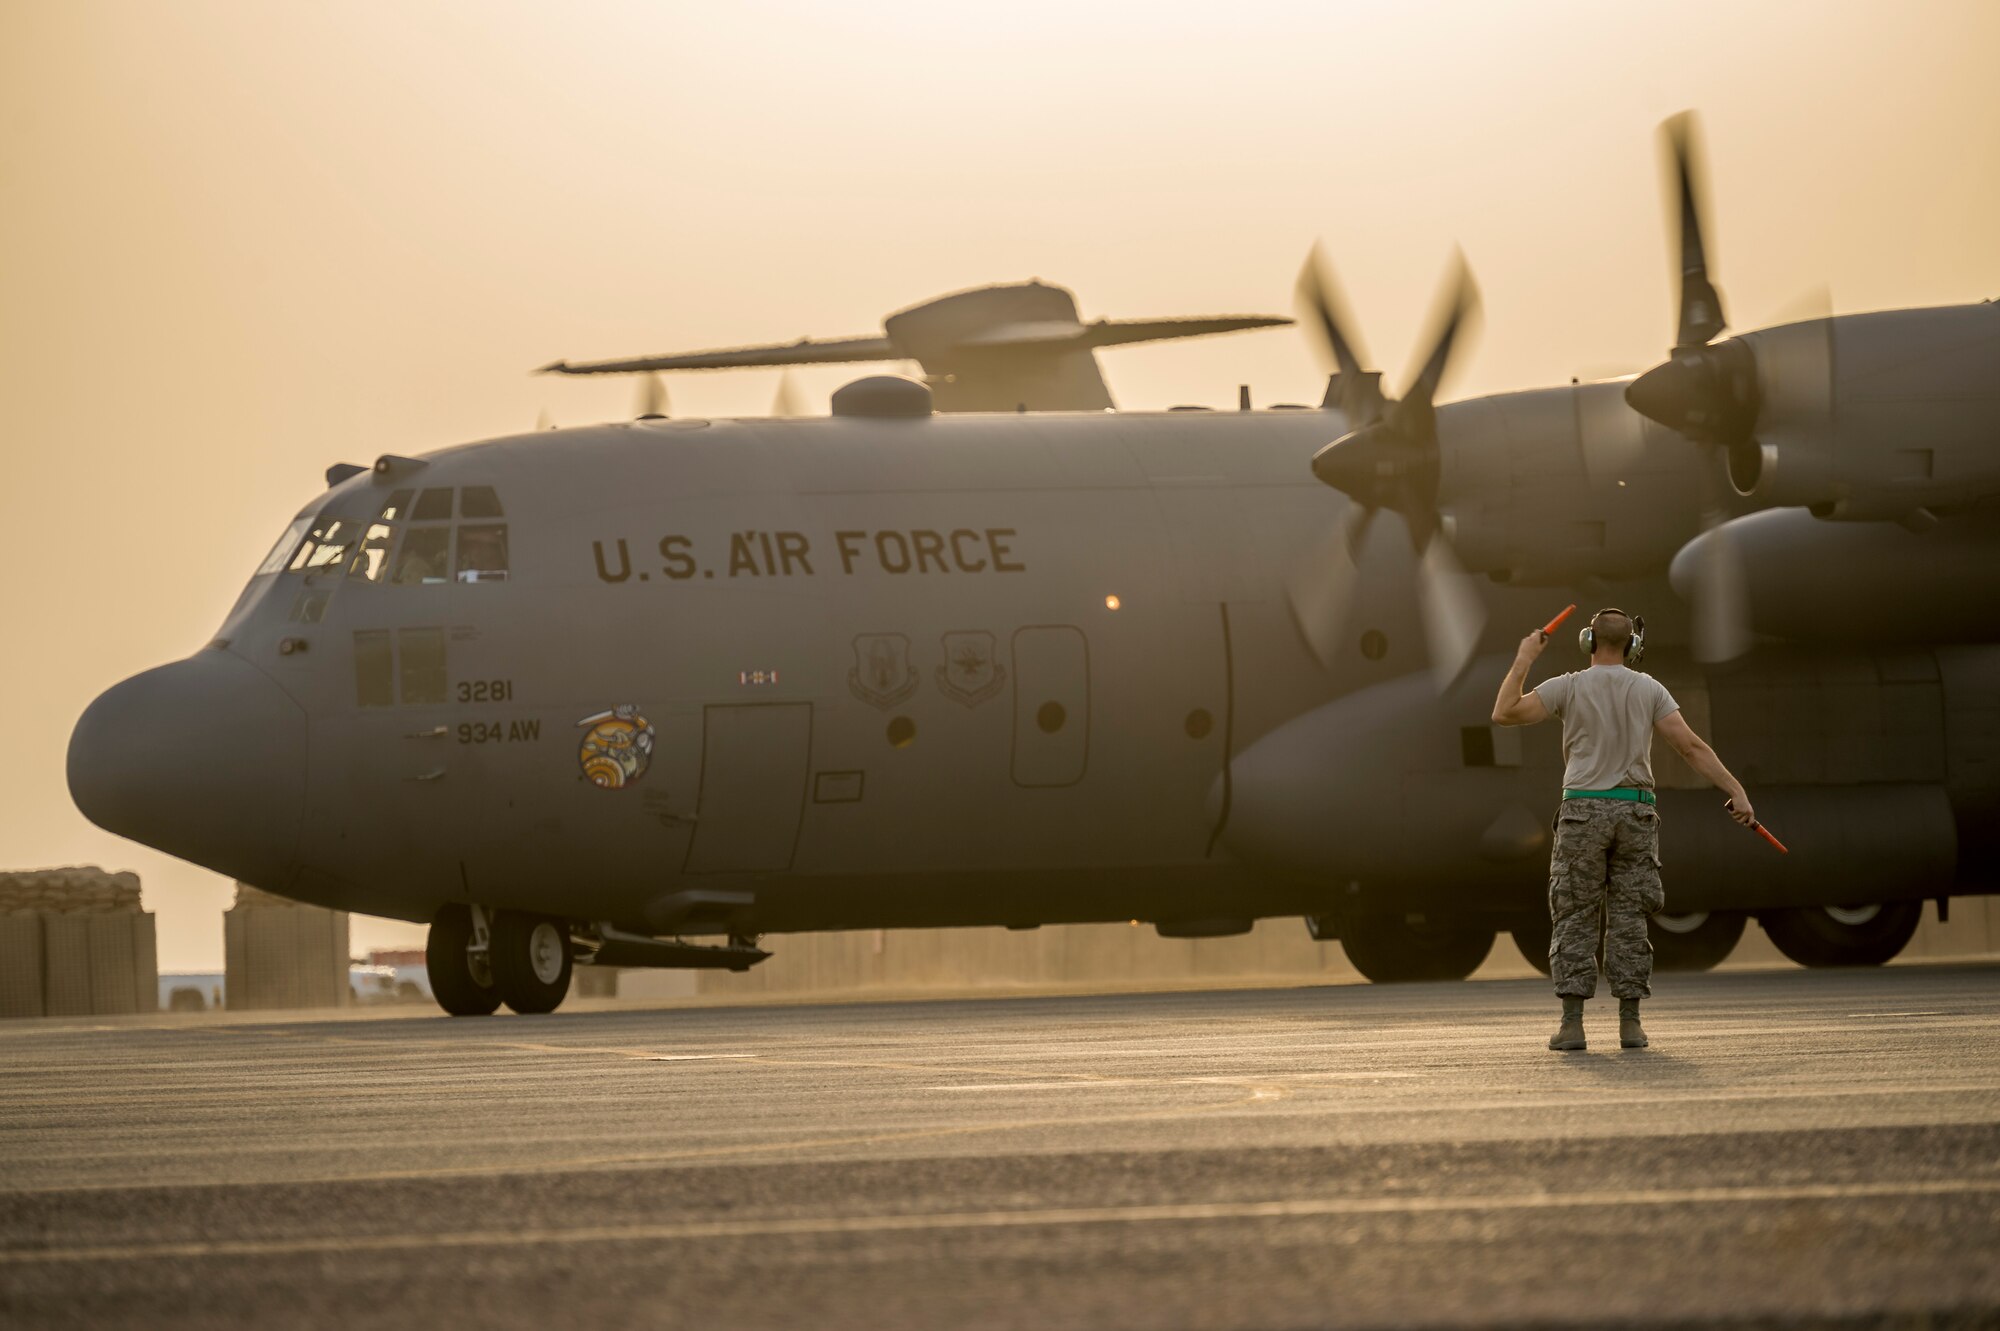 U.S. Air Force Senior Master Sgt. Kyle Klass, 386th Expeditionary Aircraft Maintenance Squadron, dayshift production superintendent, marshals a C-130H Hercules from the 934th Air Wing after it landed at its new home Sept. 12, 2014 at an undisclosed location in Southwest Asia. The crew will be stationed with the 386th Air Expeditionary Wing for the next four months and deployed from Minneapolis-St Paul Air Reserve Station, Minn. in support of Operation Enduring Freedom. (U.S. Air Force photo by Staff Sgt. Jeremy Bowcock)